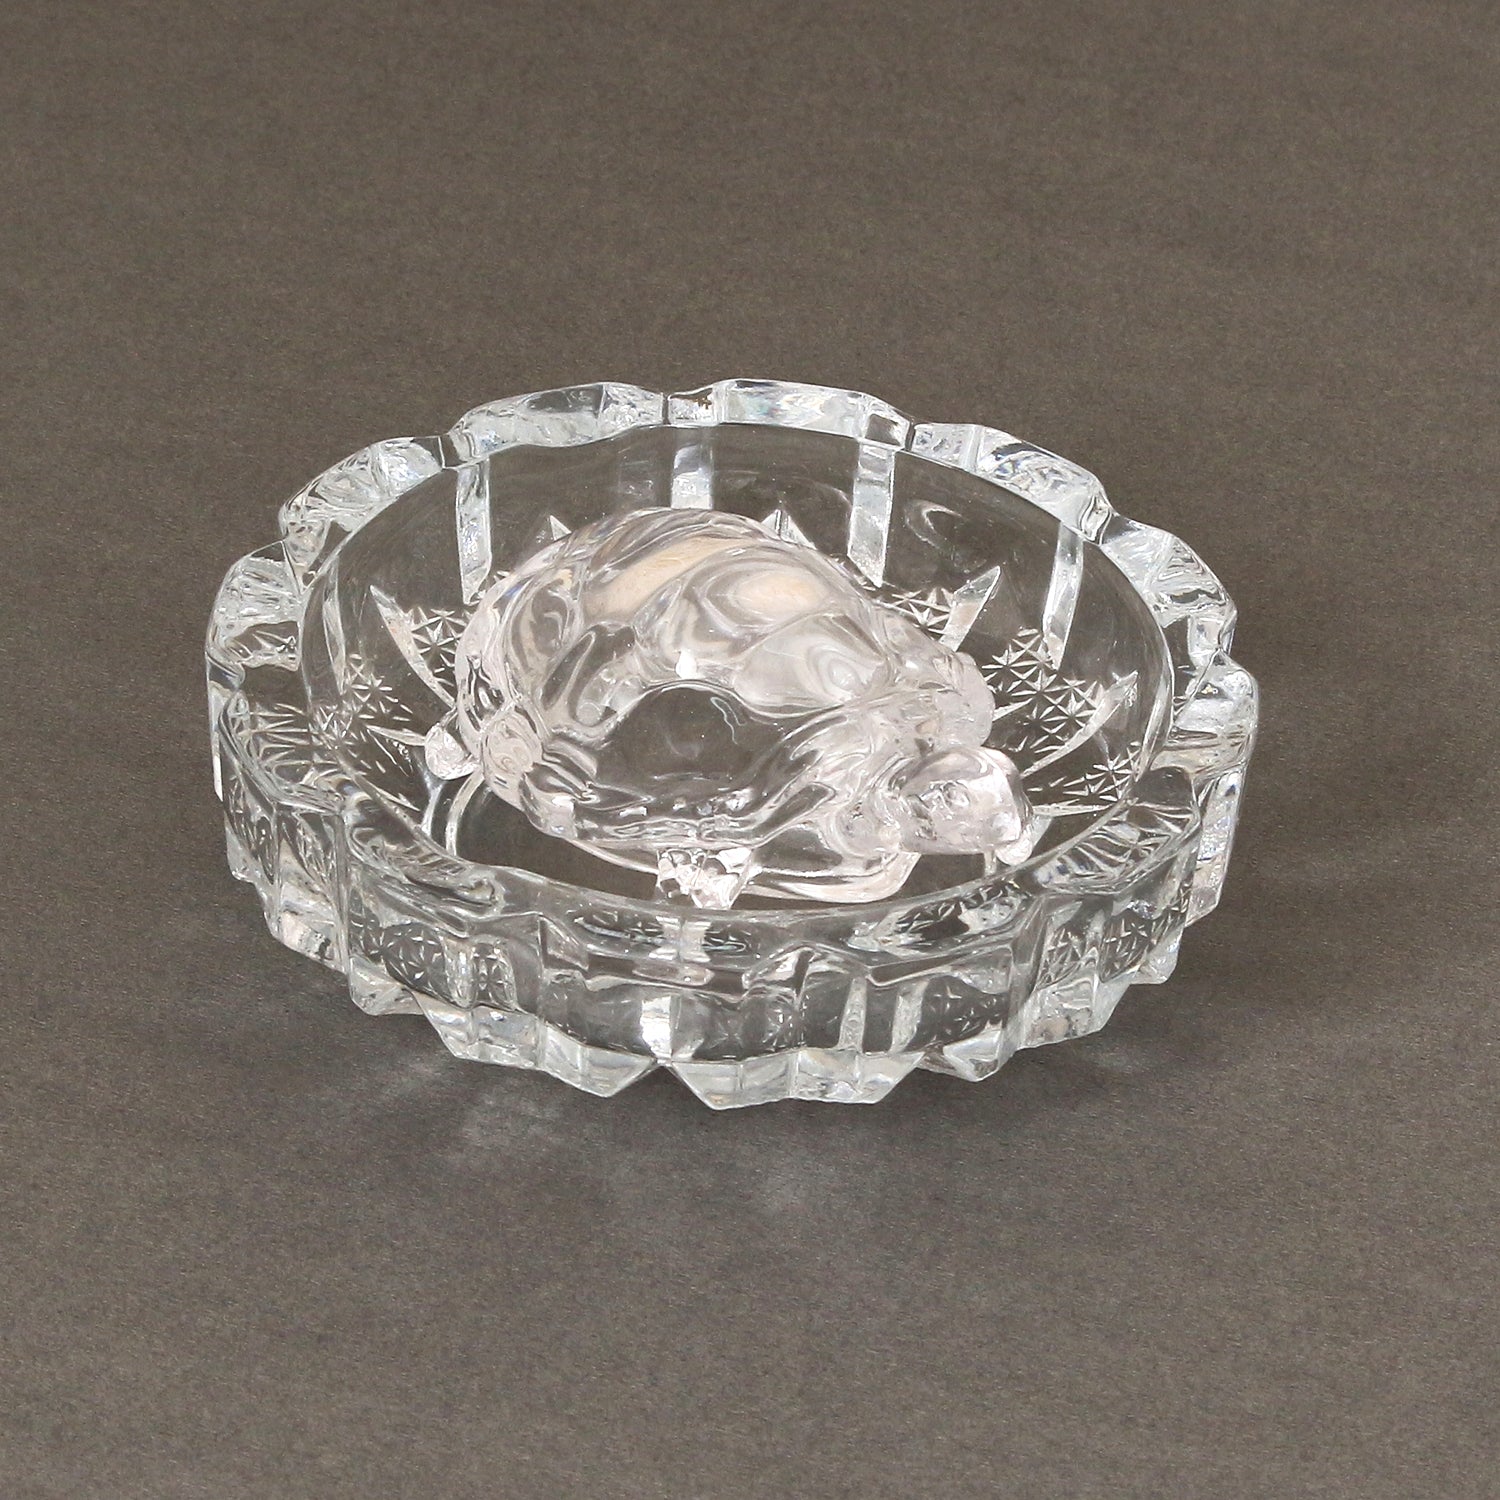 Decorative Feng-Shui White Crystal tortoise statue with Plate for Office Desks and Home 2